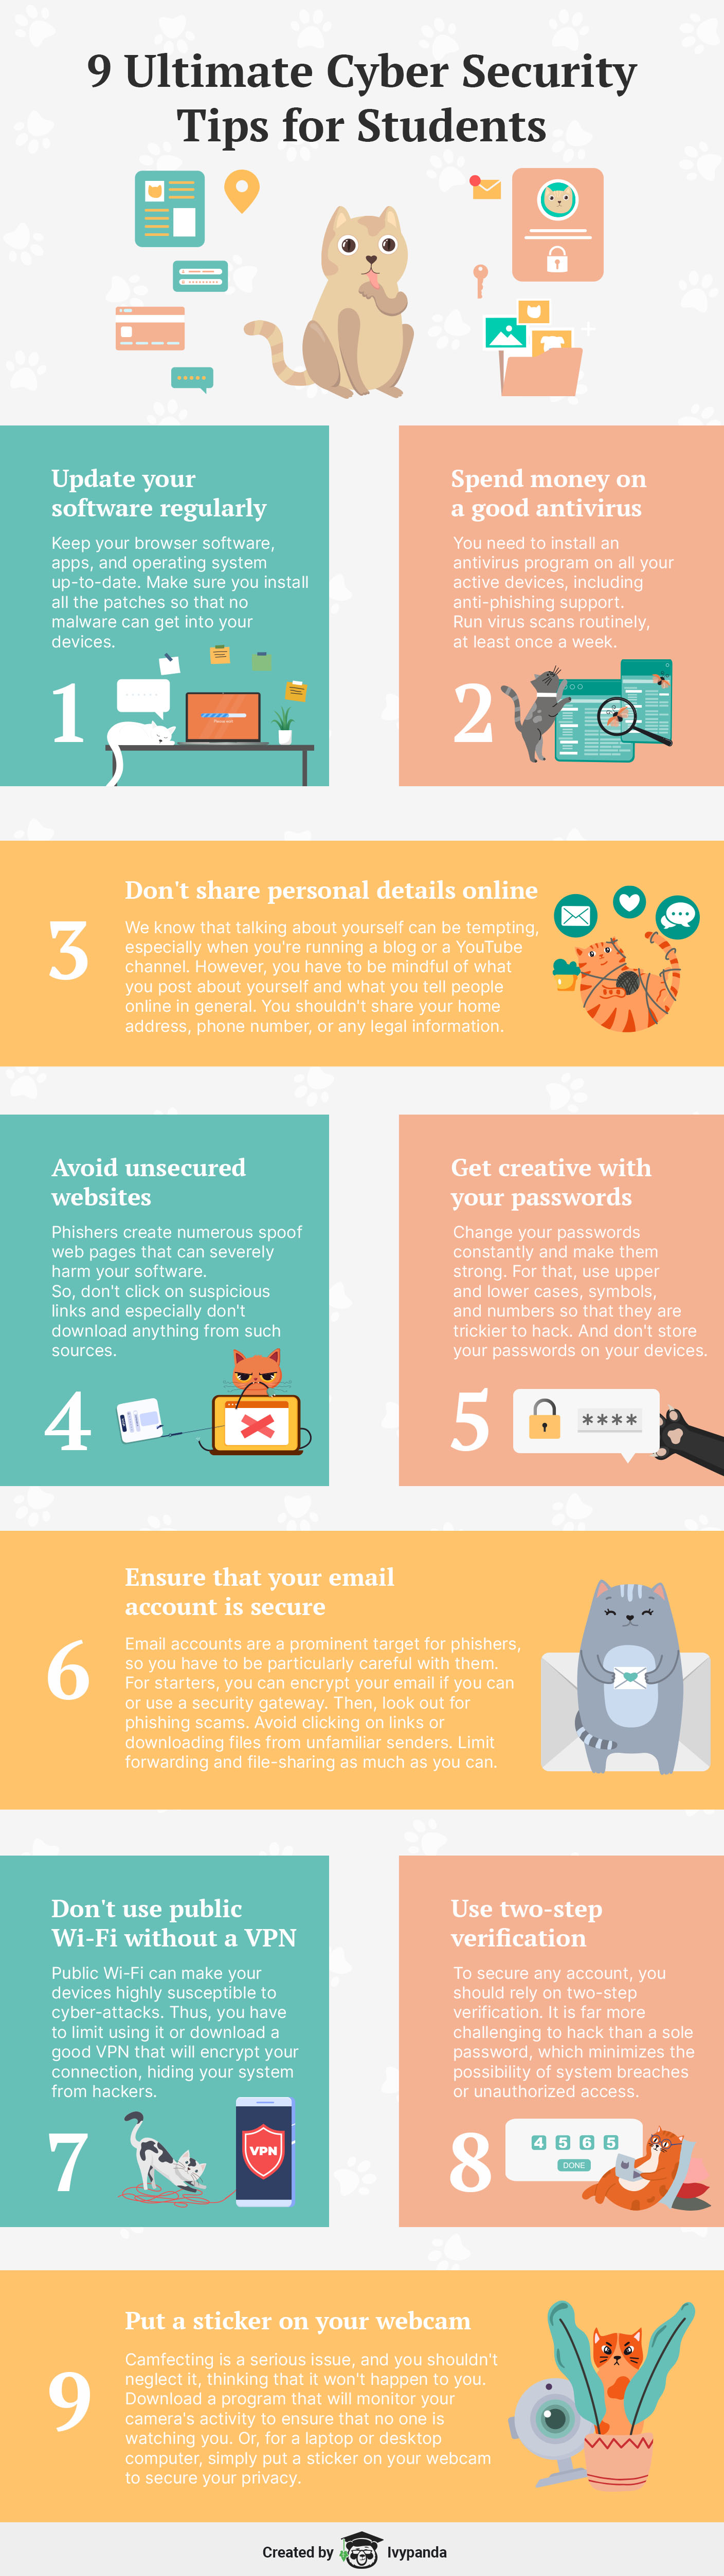 Ultimate Cyber Security Tips for Students Infographic